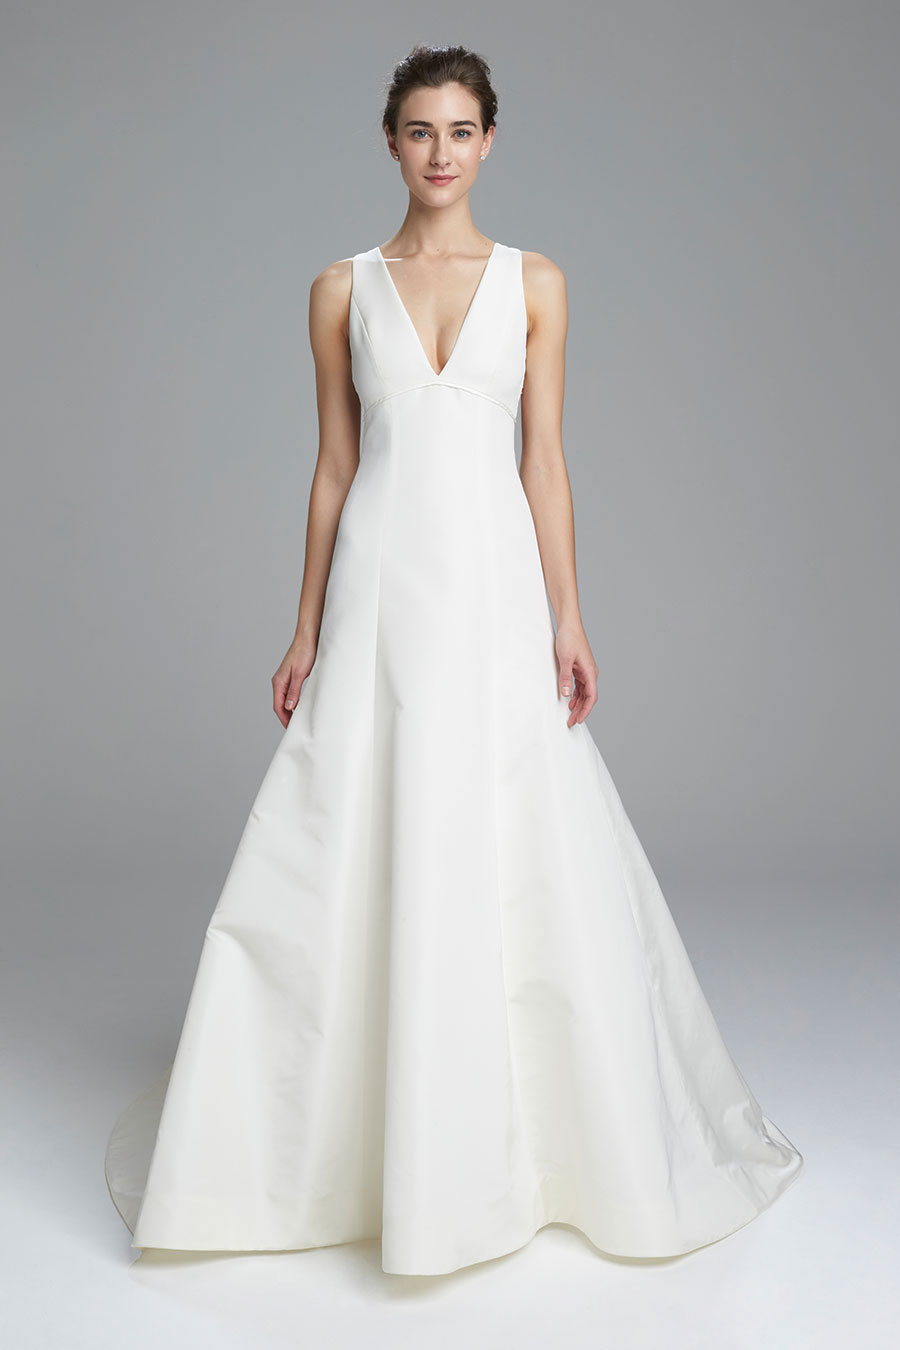 Amsale Spring 2017 Bridal Gown Collection: Keaton